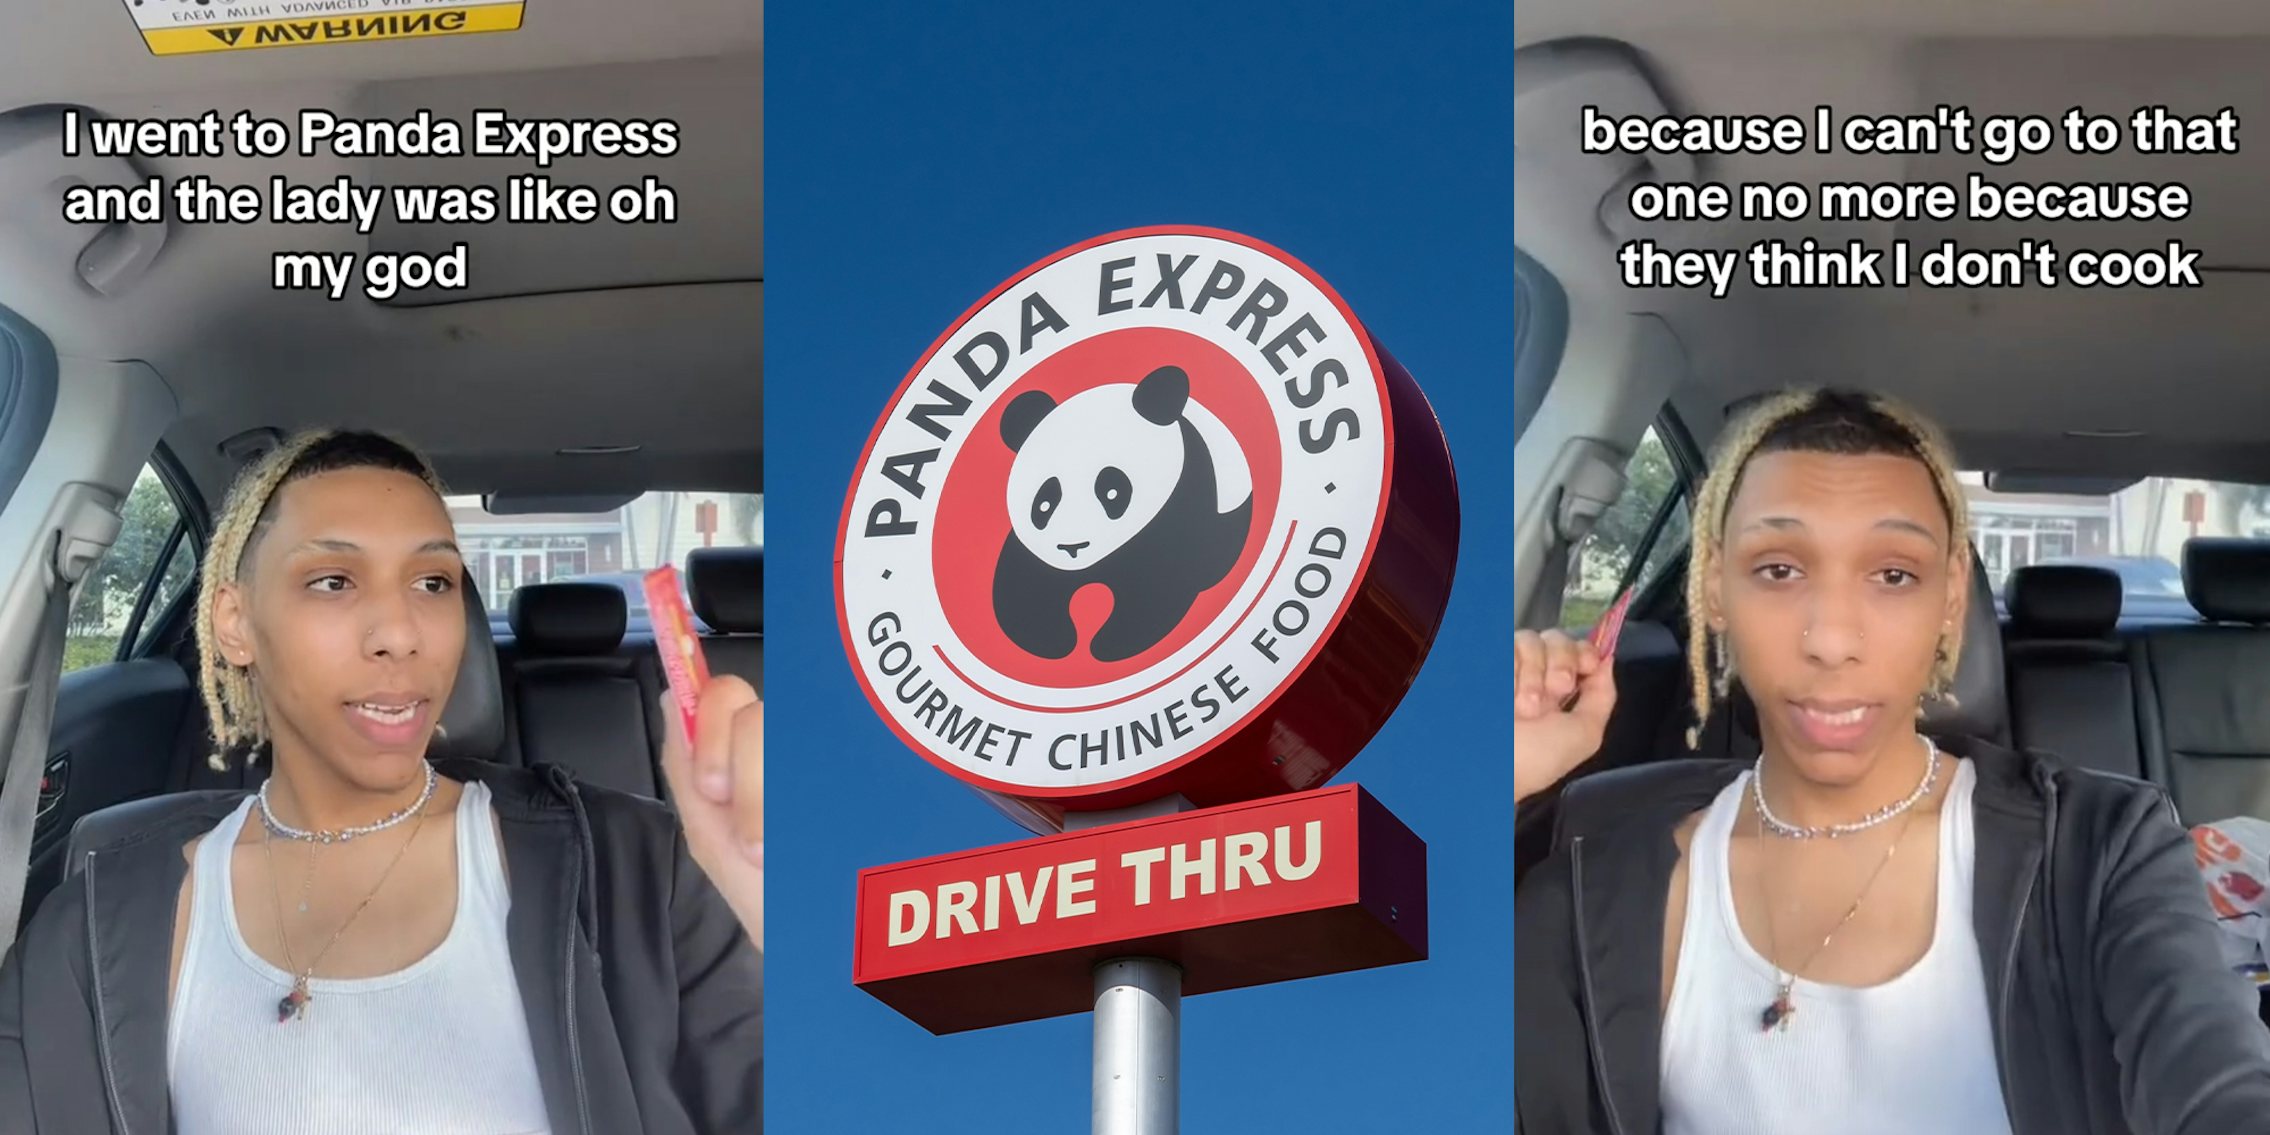 Customer drives 30 minutes to another Panda Express after worker calls him out for eating there again